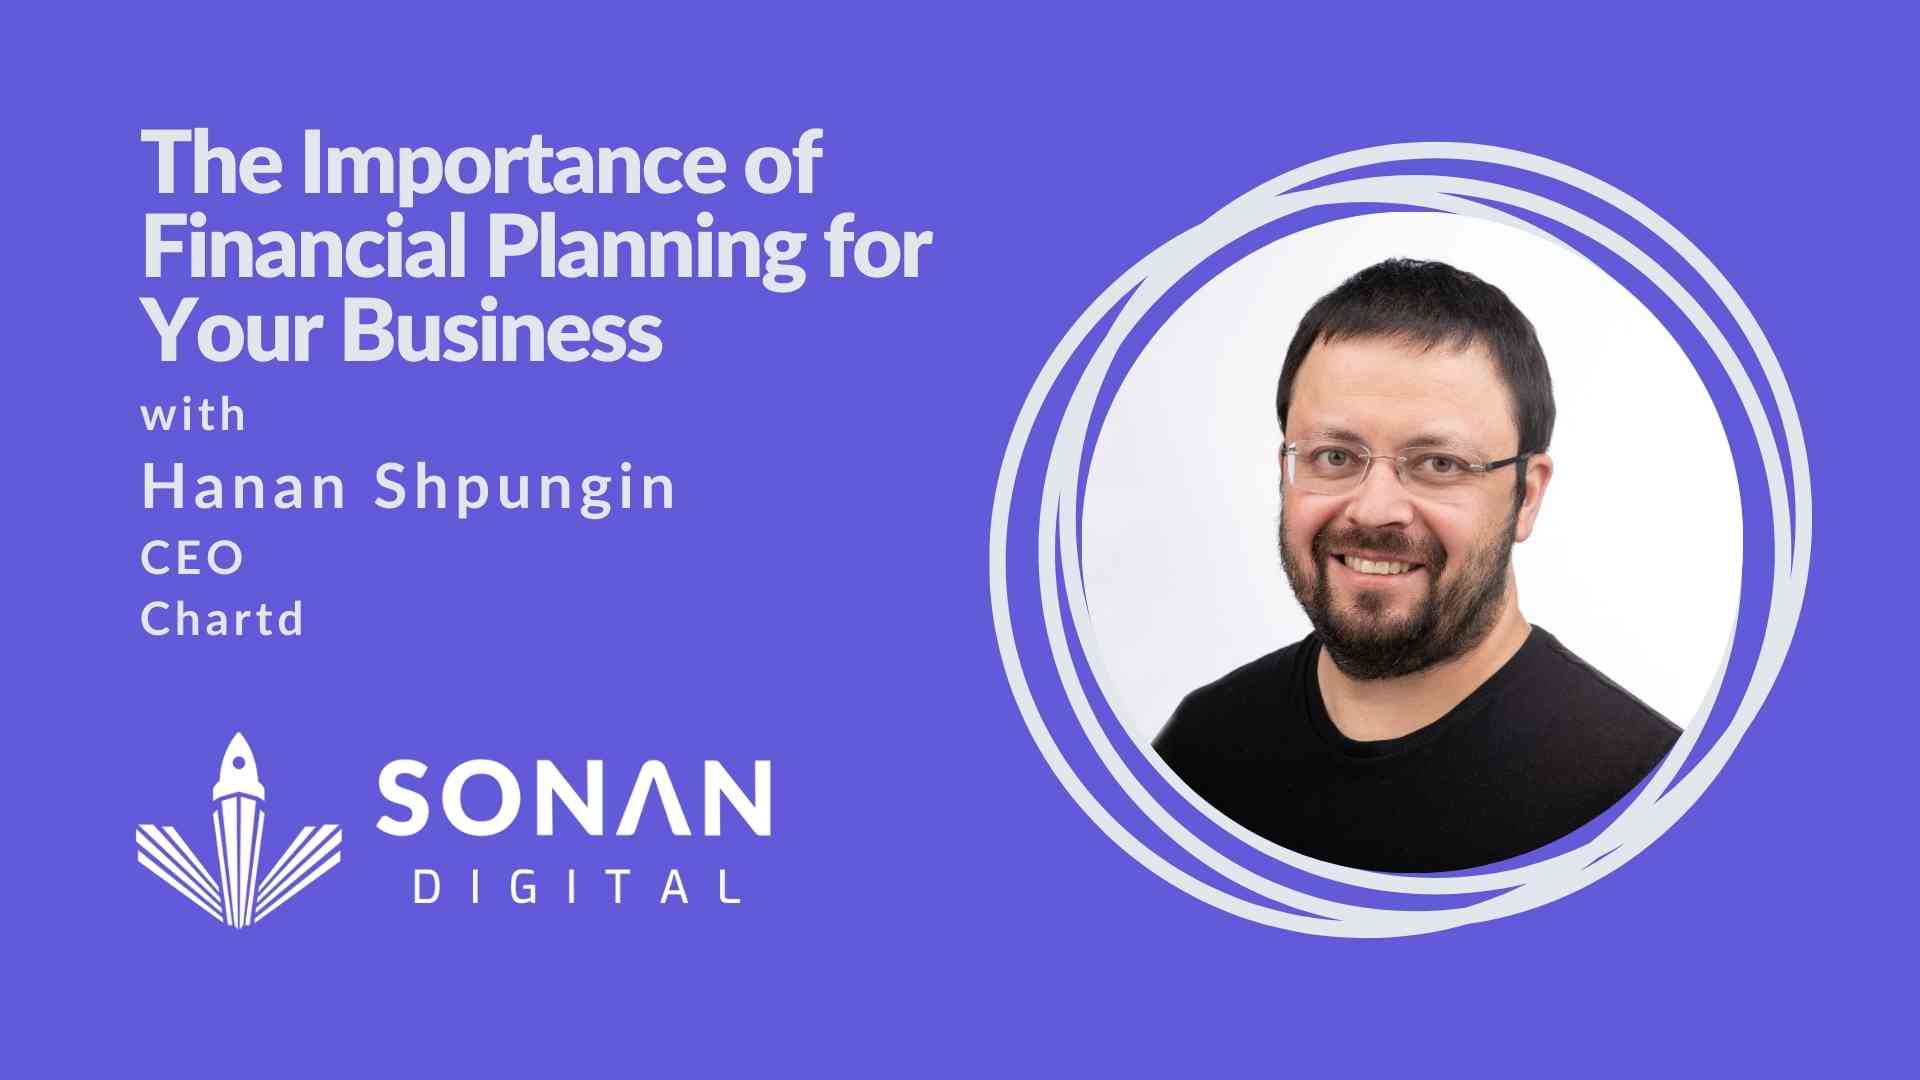 Chartd’s Hanan Shpungin on the Importance of Financial Planning for Your Business